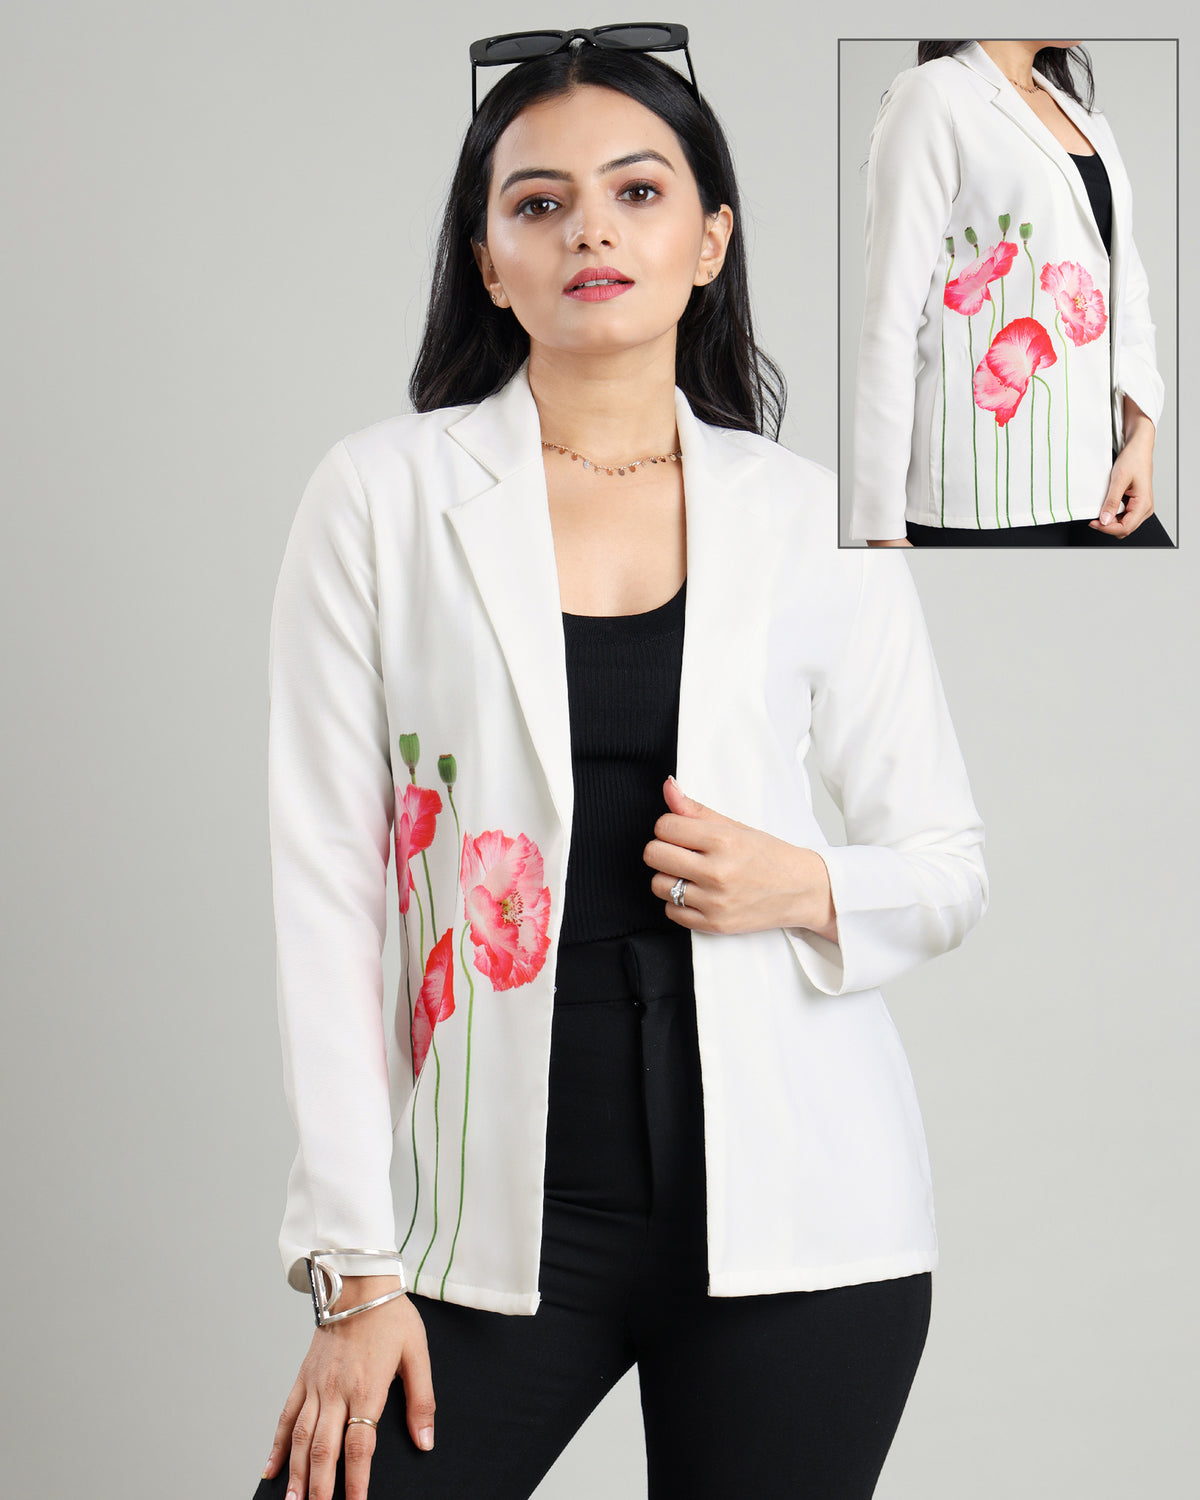 The Perfect Spring Fling: Women's White Jacket